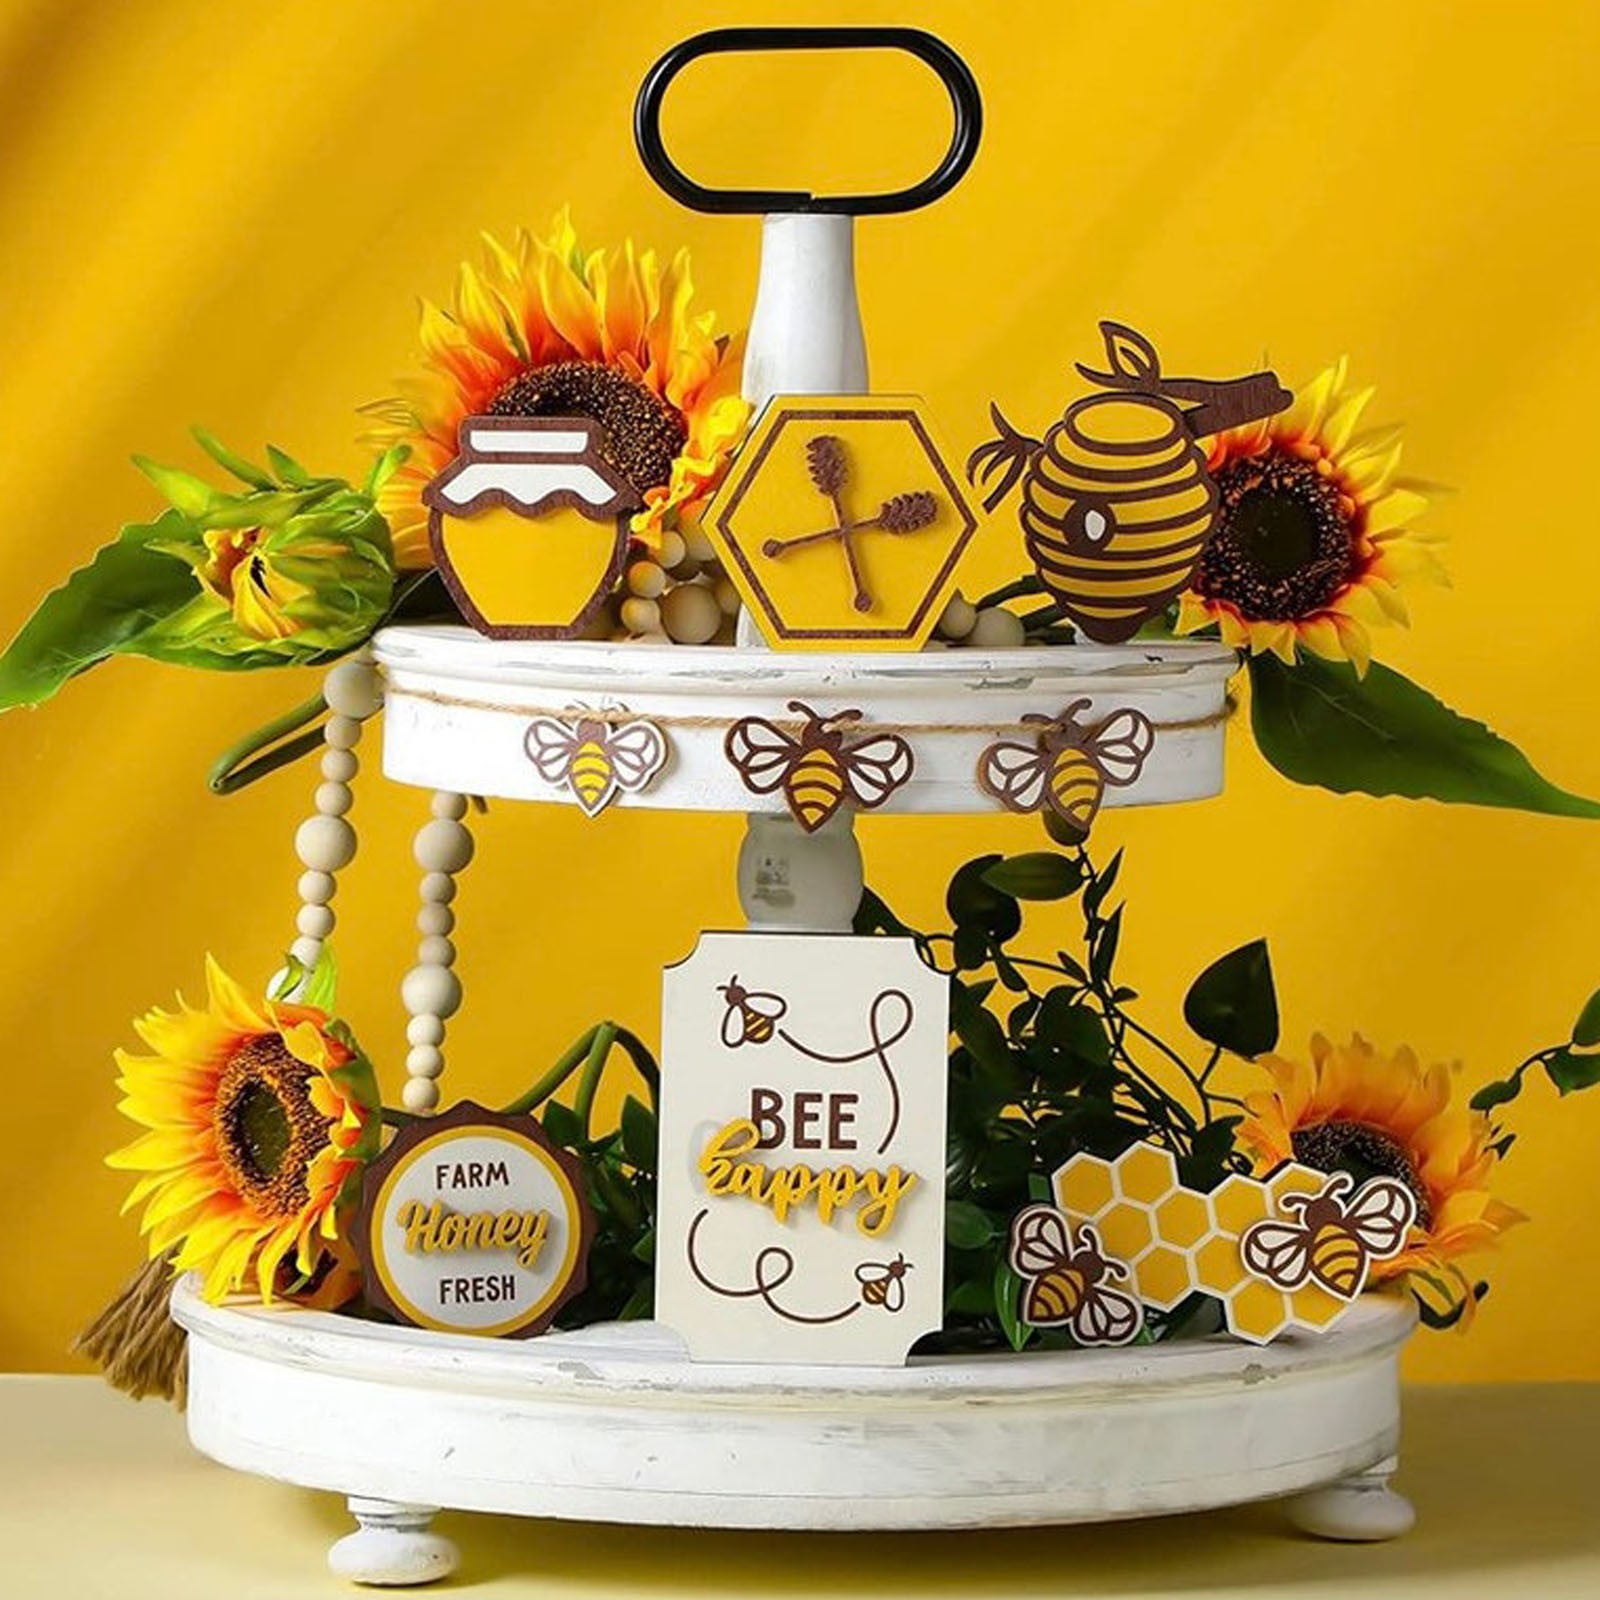 Mini Tiered Tray Picket Fence, Bumblebee Themed. Yellow, Black and White  Bee, Daisies. 6 Wide by 4 Tall Farmhouse Decor 